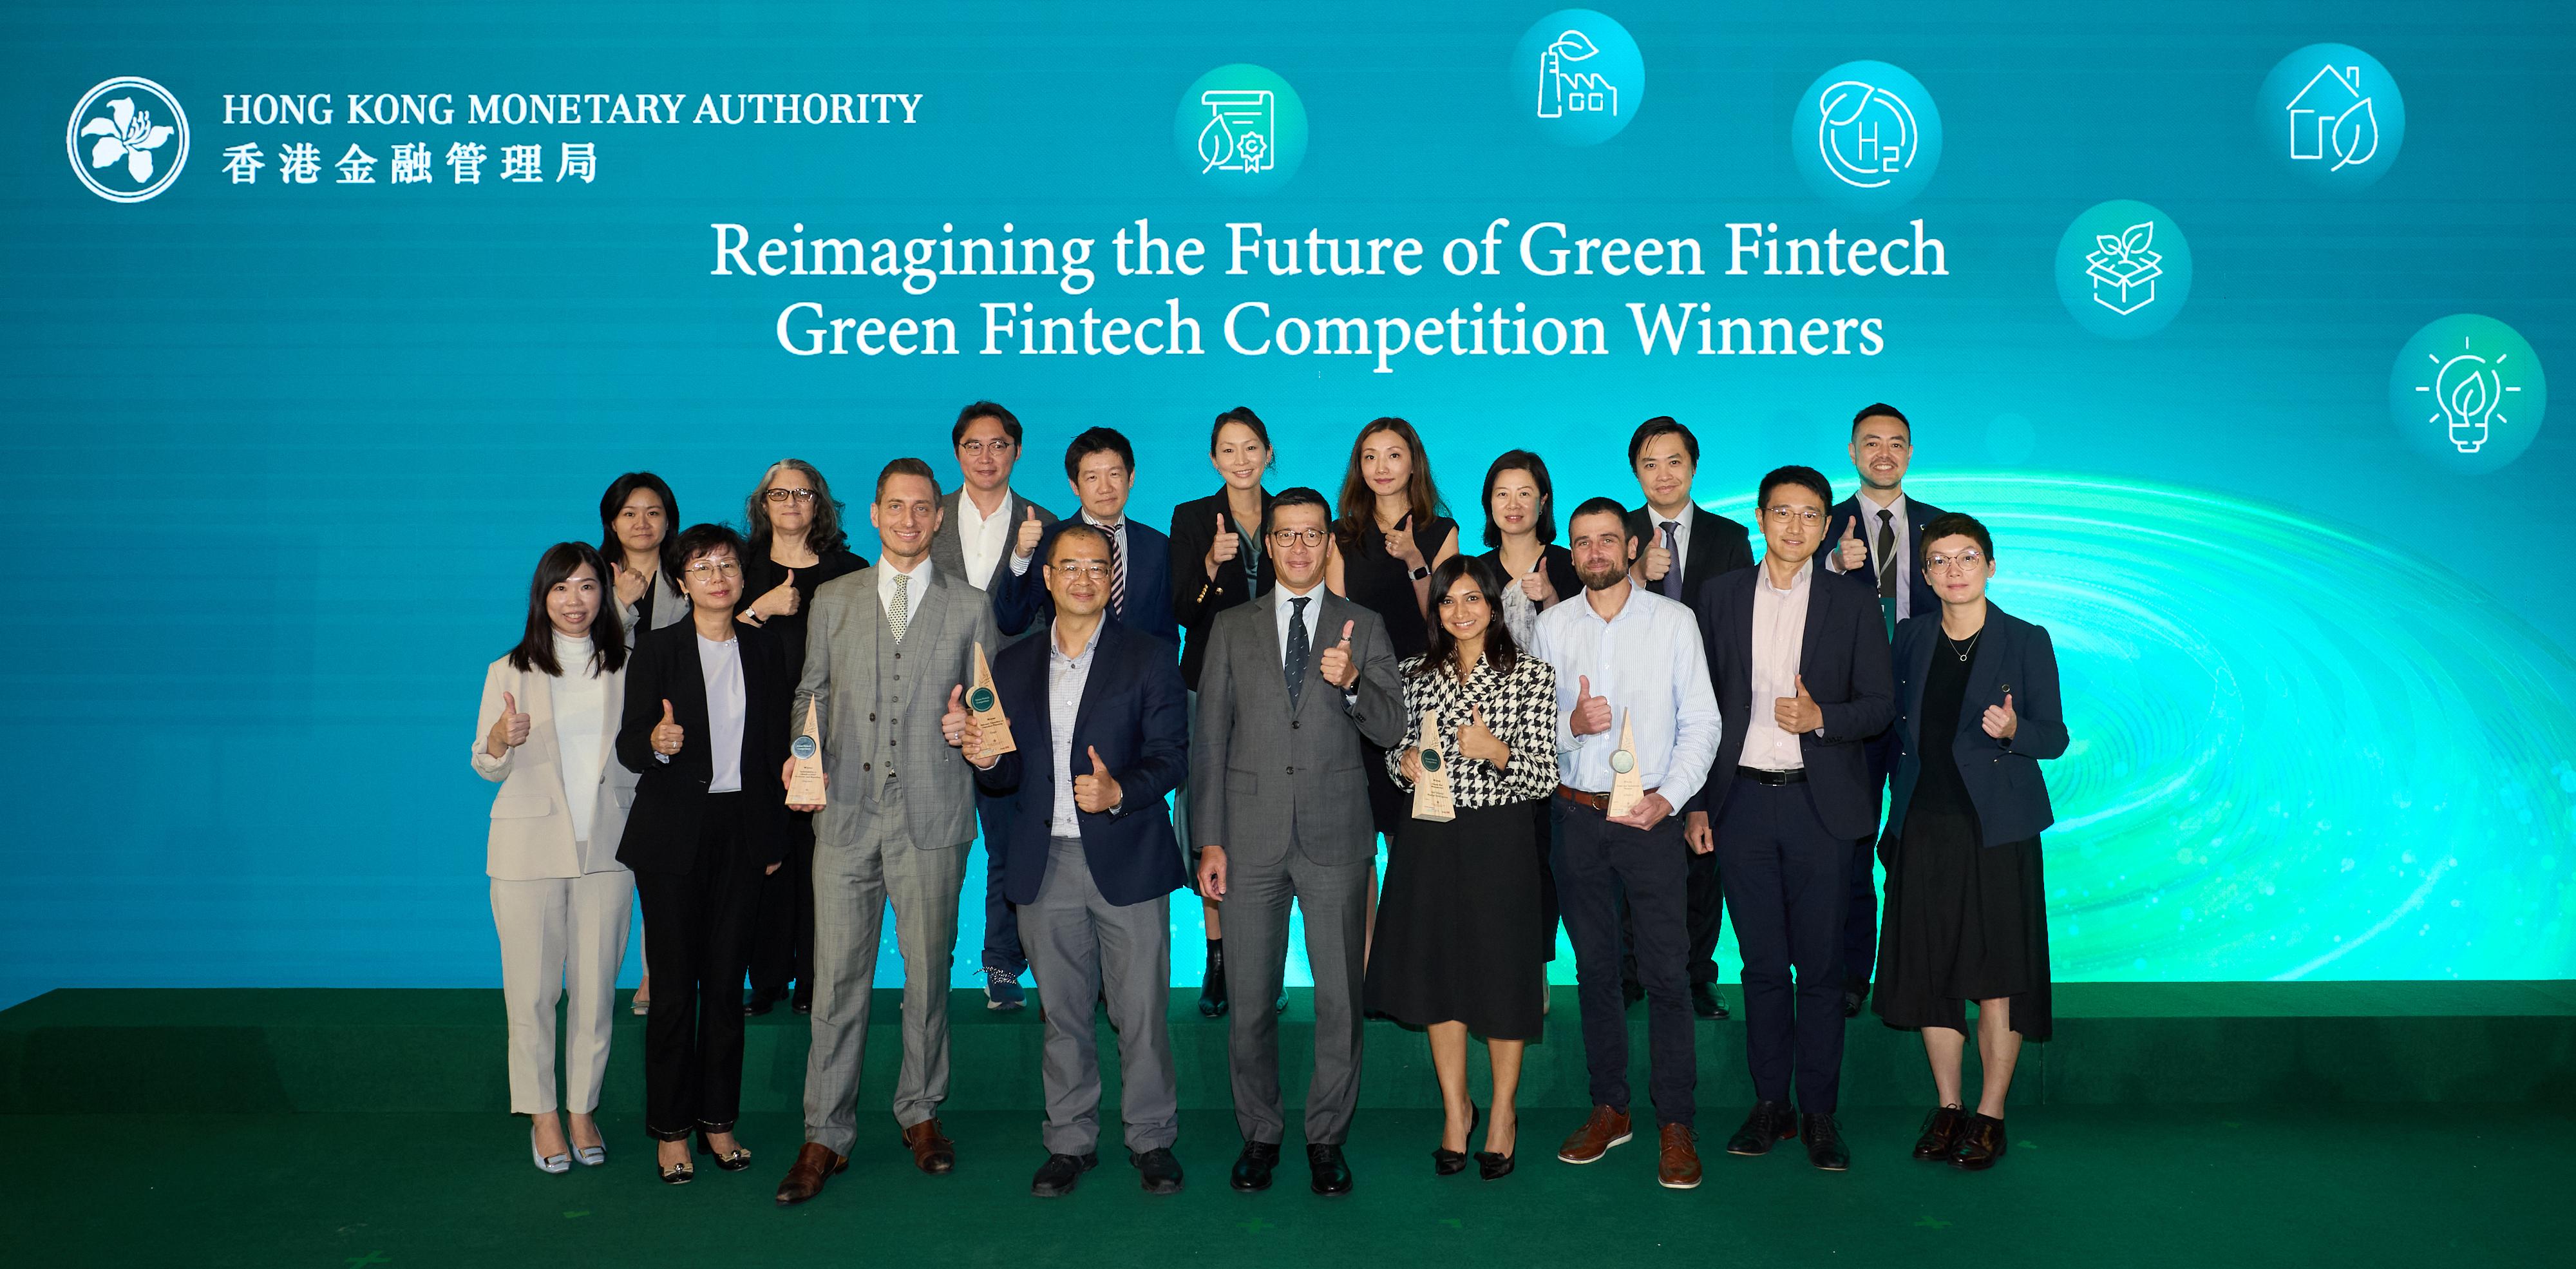 The Hong Kong Monetary Authority (HKMA) organised the Green and Sustainable Banking Conference today (December 11). The Executive Director (Banking Policy) of the HKMA, Mr Donald Chen, presents the awards to the winners of the Green Fintech Competition at the Green and Sustainable Banking Conference. The photo shows Mr Chen (front row, centre), the winners and the judging panel. 